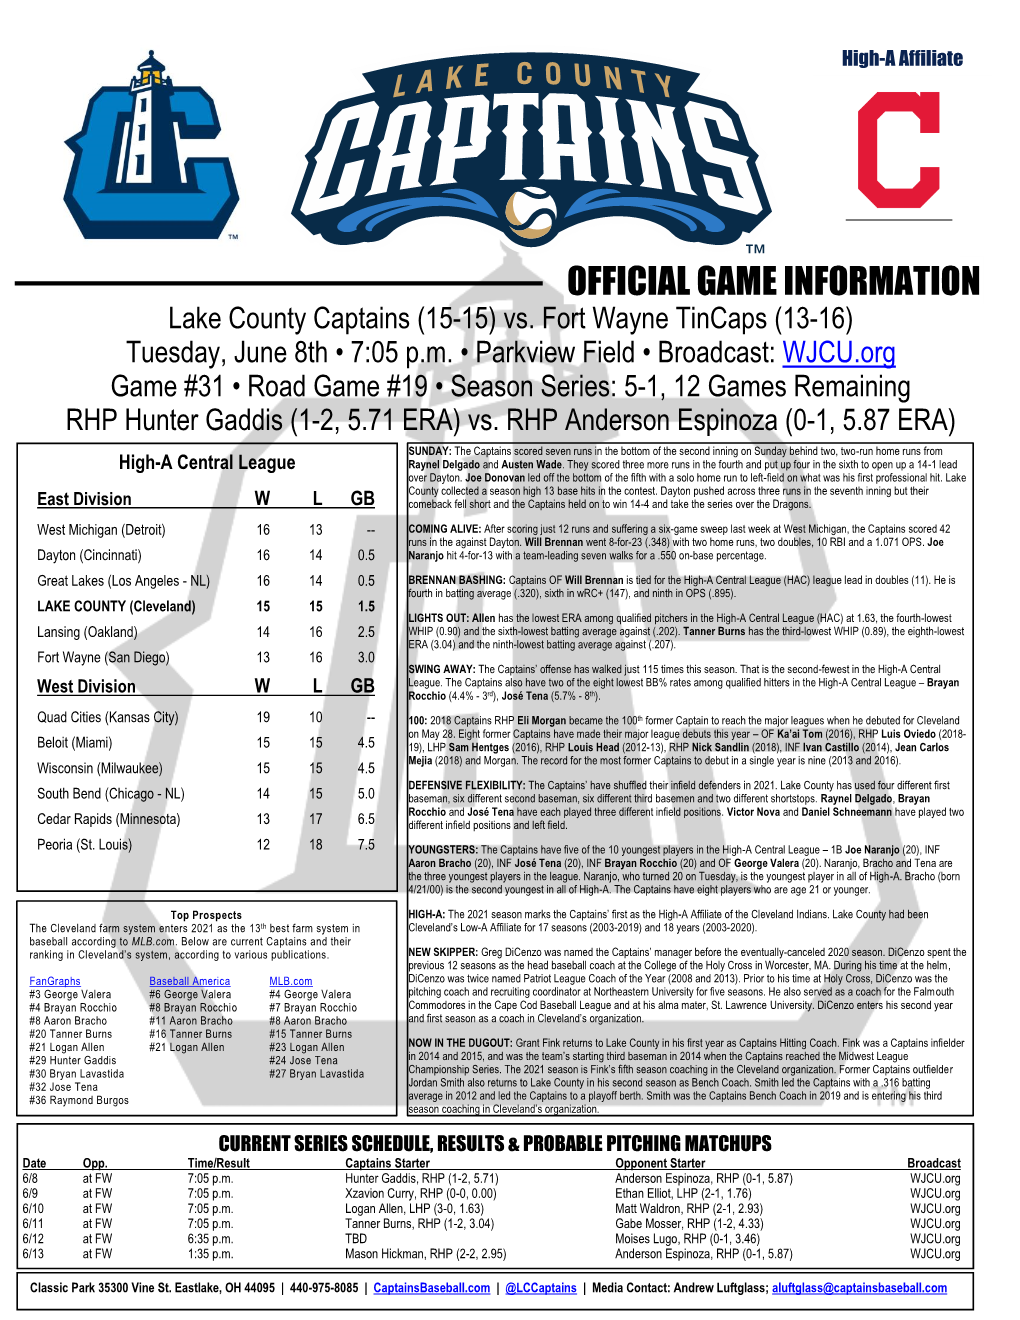 OFFICIAL GAME INFORMATION Lake County Captains (15-15) Vs